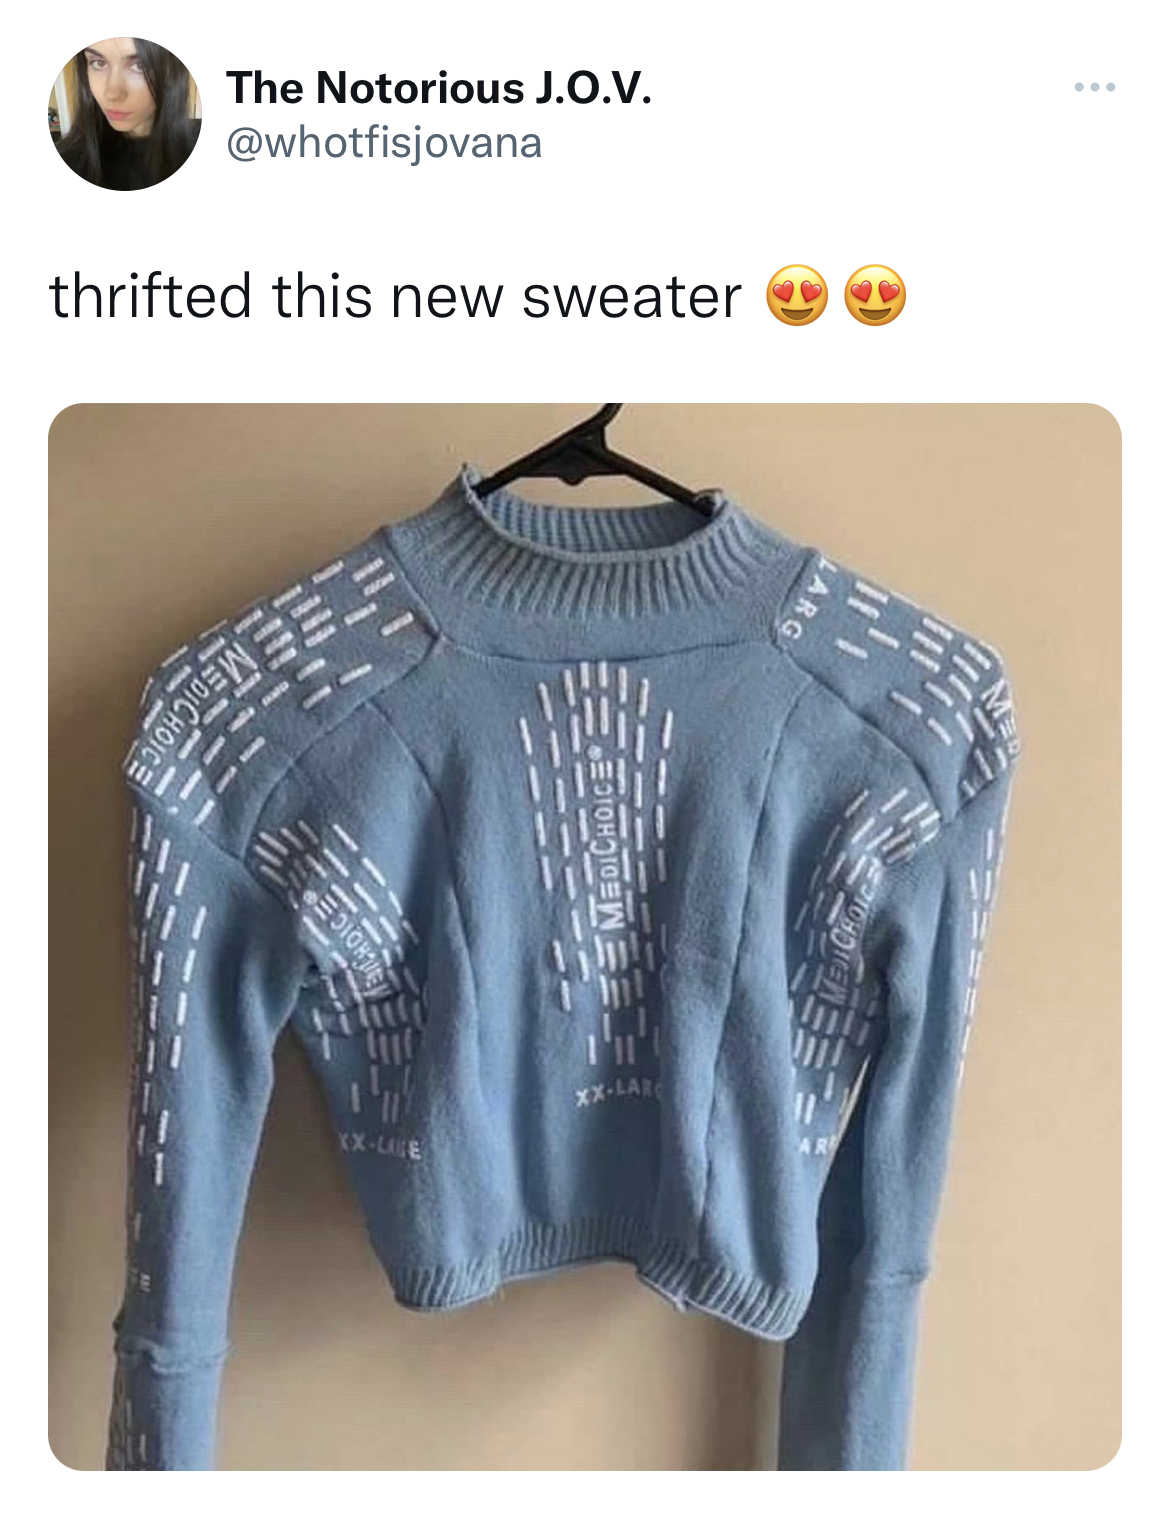 viral and funny tweets - psych ward grippy socks meme - The Notorious J.O.V. thrifted this new sweater Edichoic